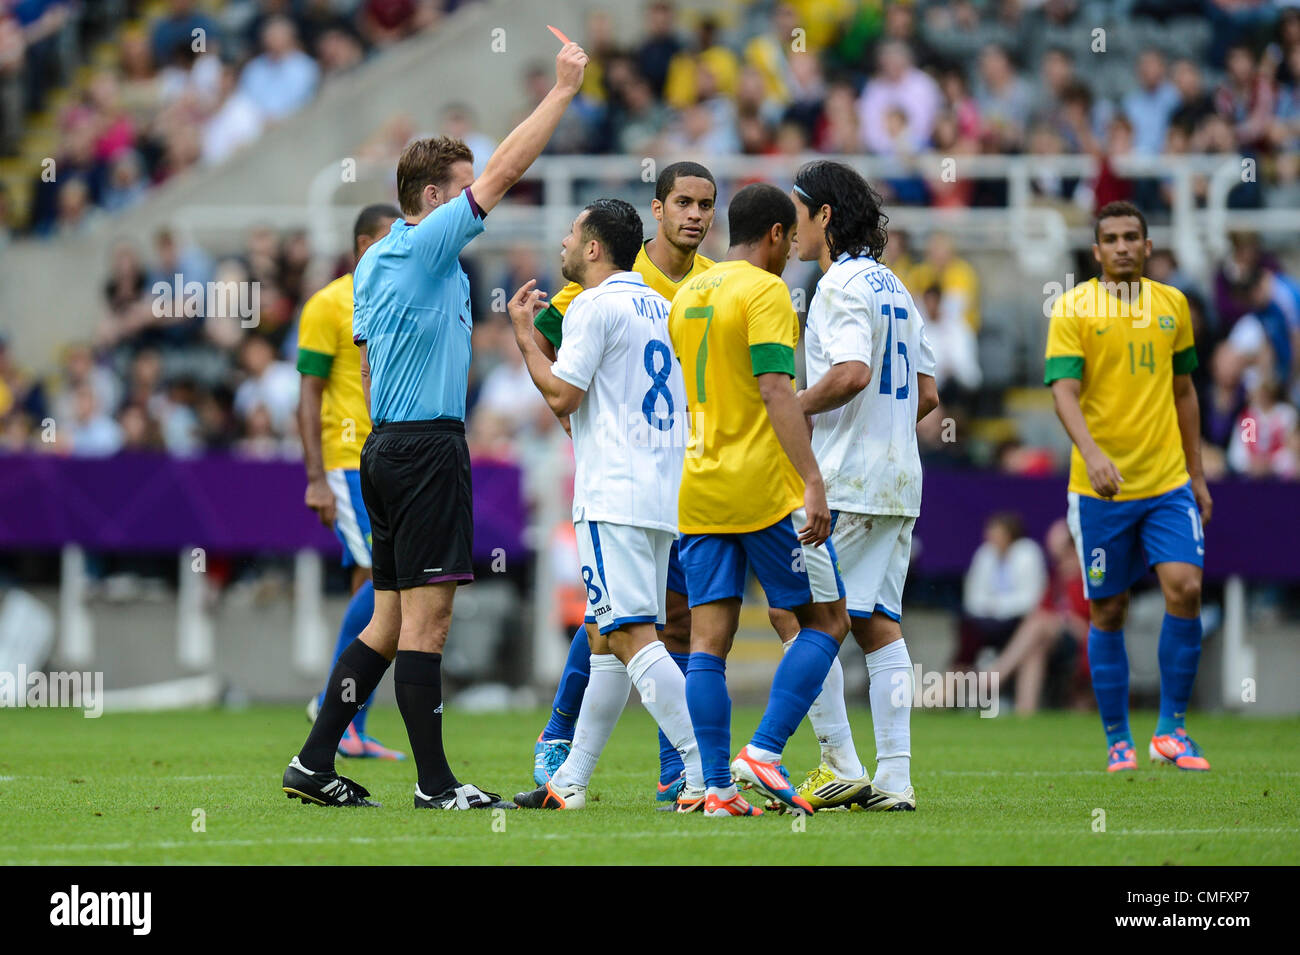 04.08.2012 Newcastle, England. Roger Espinoza of Honduras is shown the Red Card by Referee Felix Brych following his tackle on Oscar, during the Olympic Football Men's Quarter Final game between Brazil and Honduras from St James Park. Stock Photo